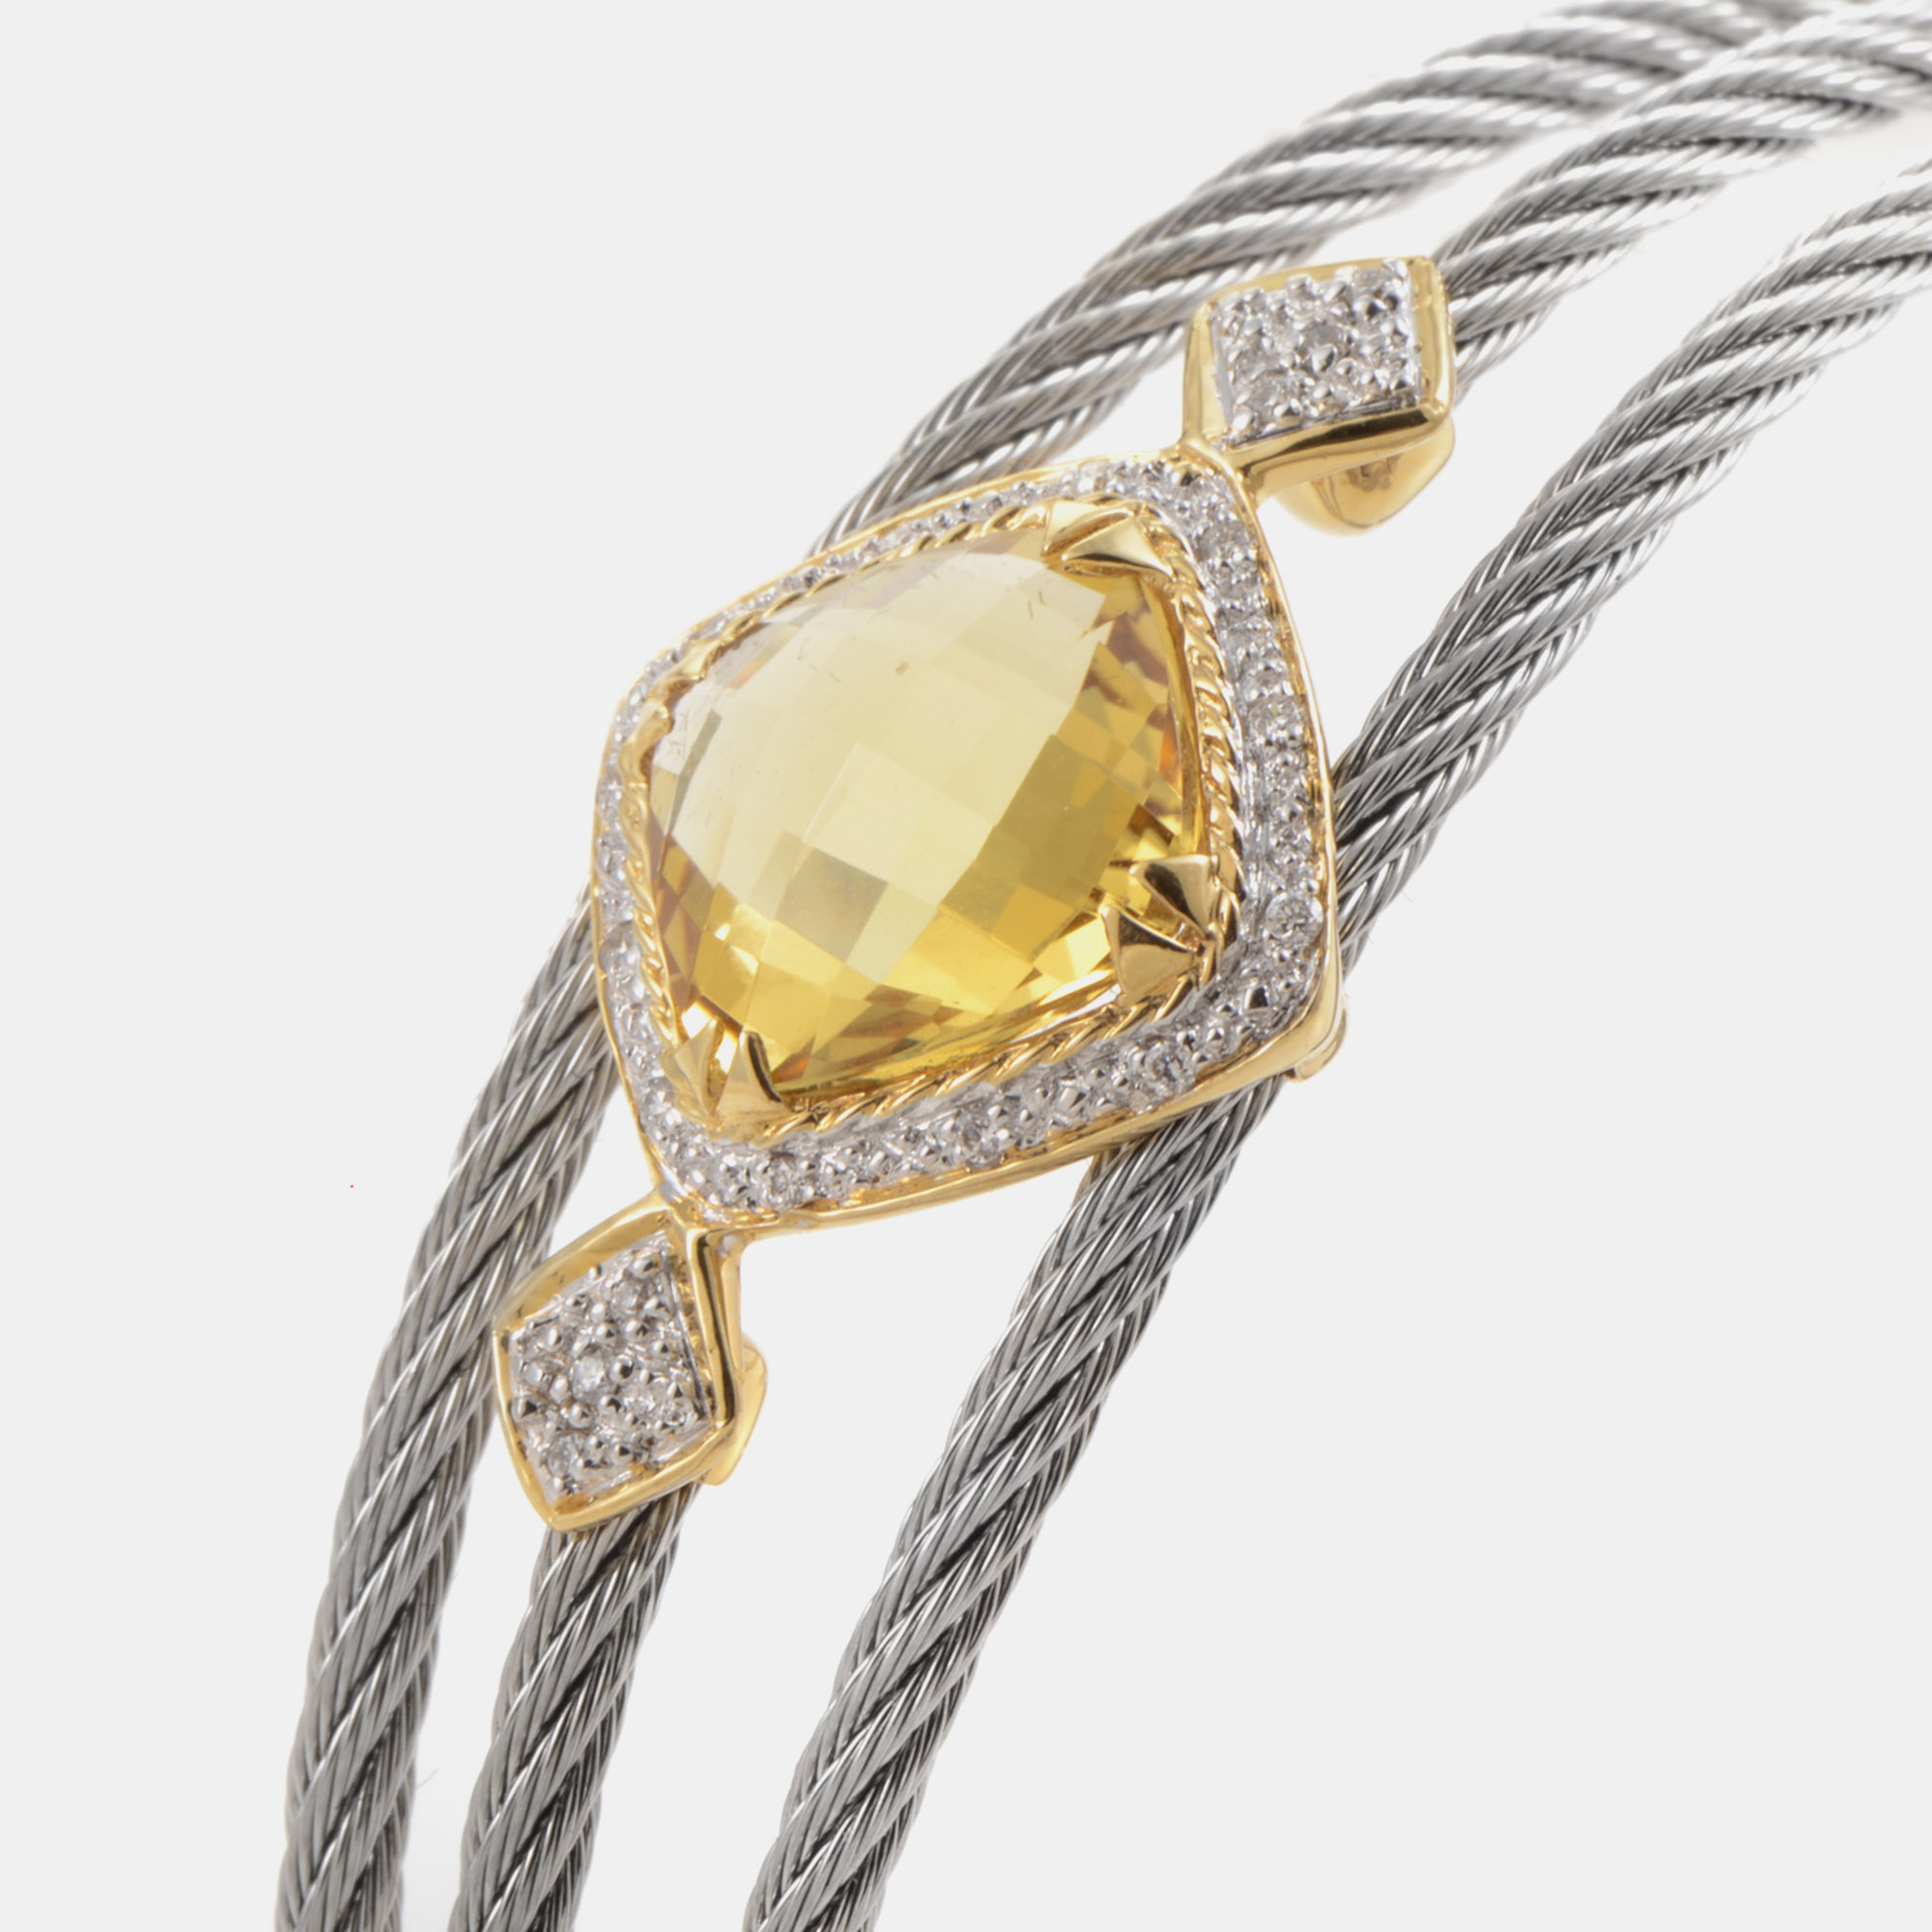 

Charriol Celtic Classique Stainless Steel and 18K Yellow Gold Diamond and Yellow Citrine Bangle Bracelet